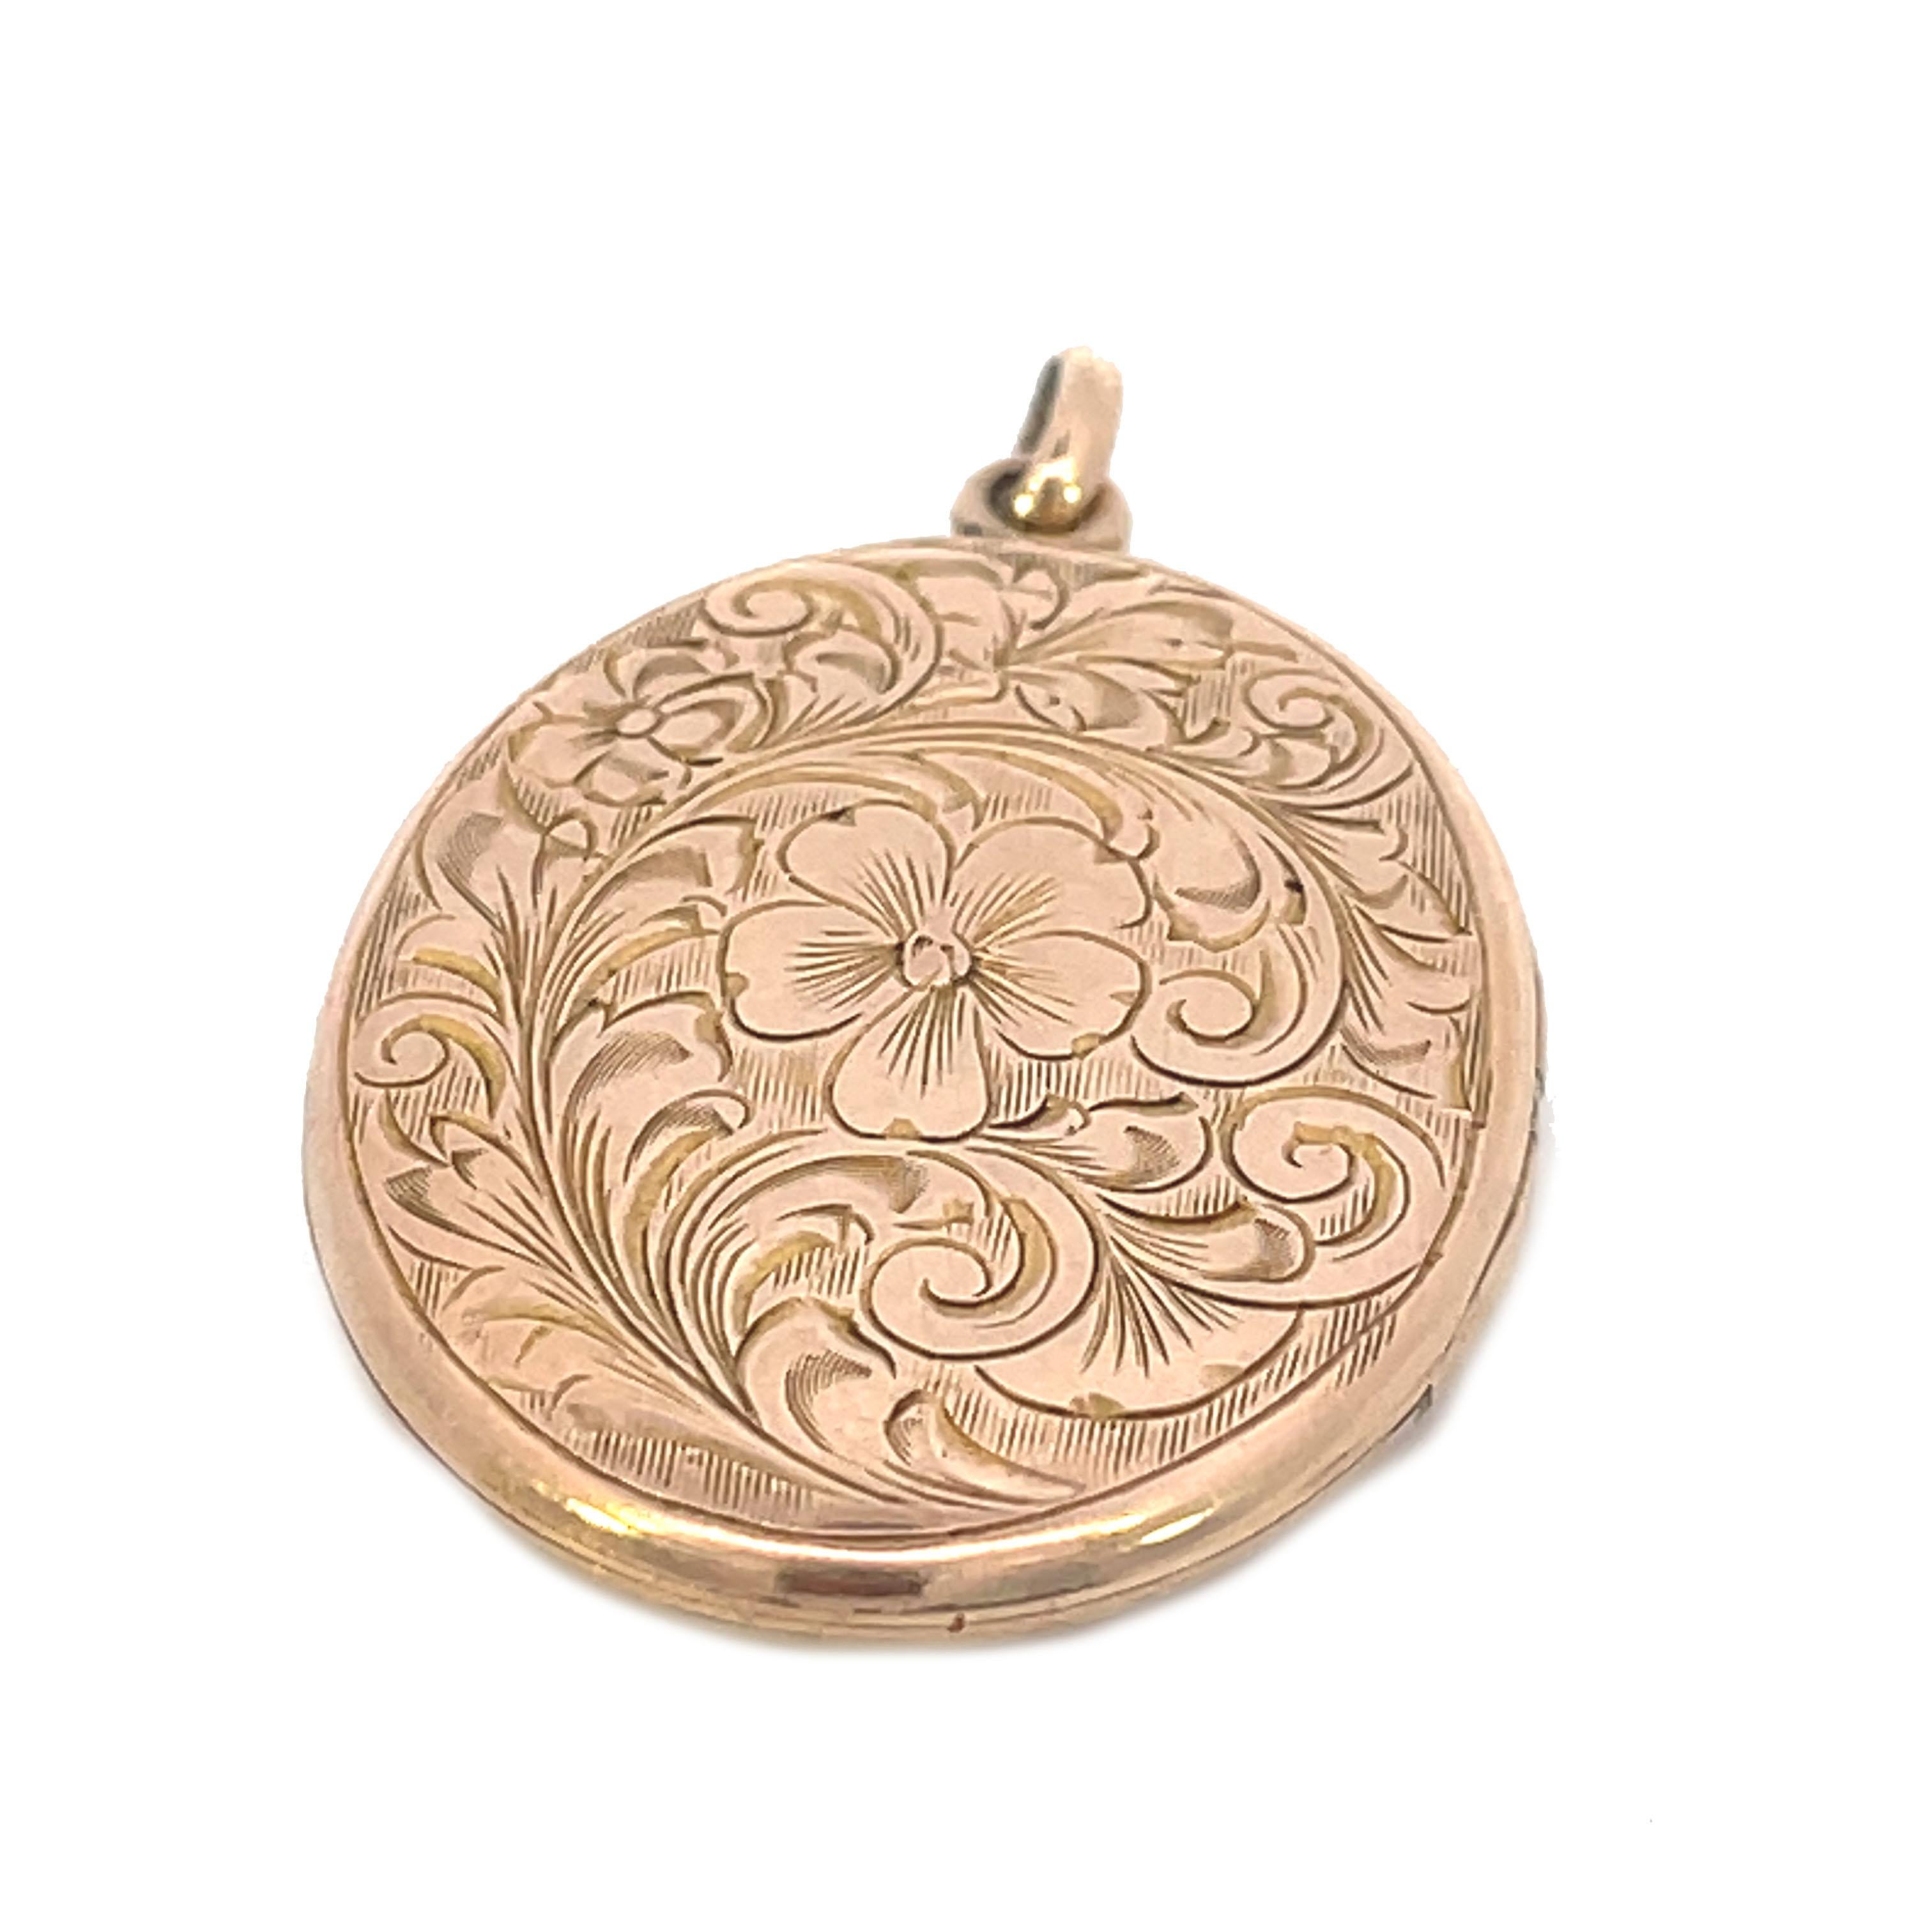 This is a beautiful hand engraved 1890 Victorian locket  in 10K rose gold that showcases a gorgeous hand engraved floral motif. At the center, a beautiful blooming flower surrounded by intricately detailed leaves and fanciful flowing swirls along